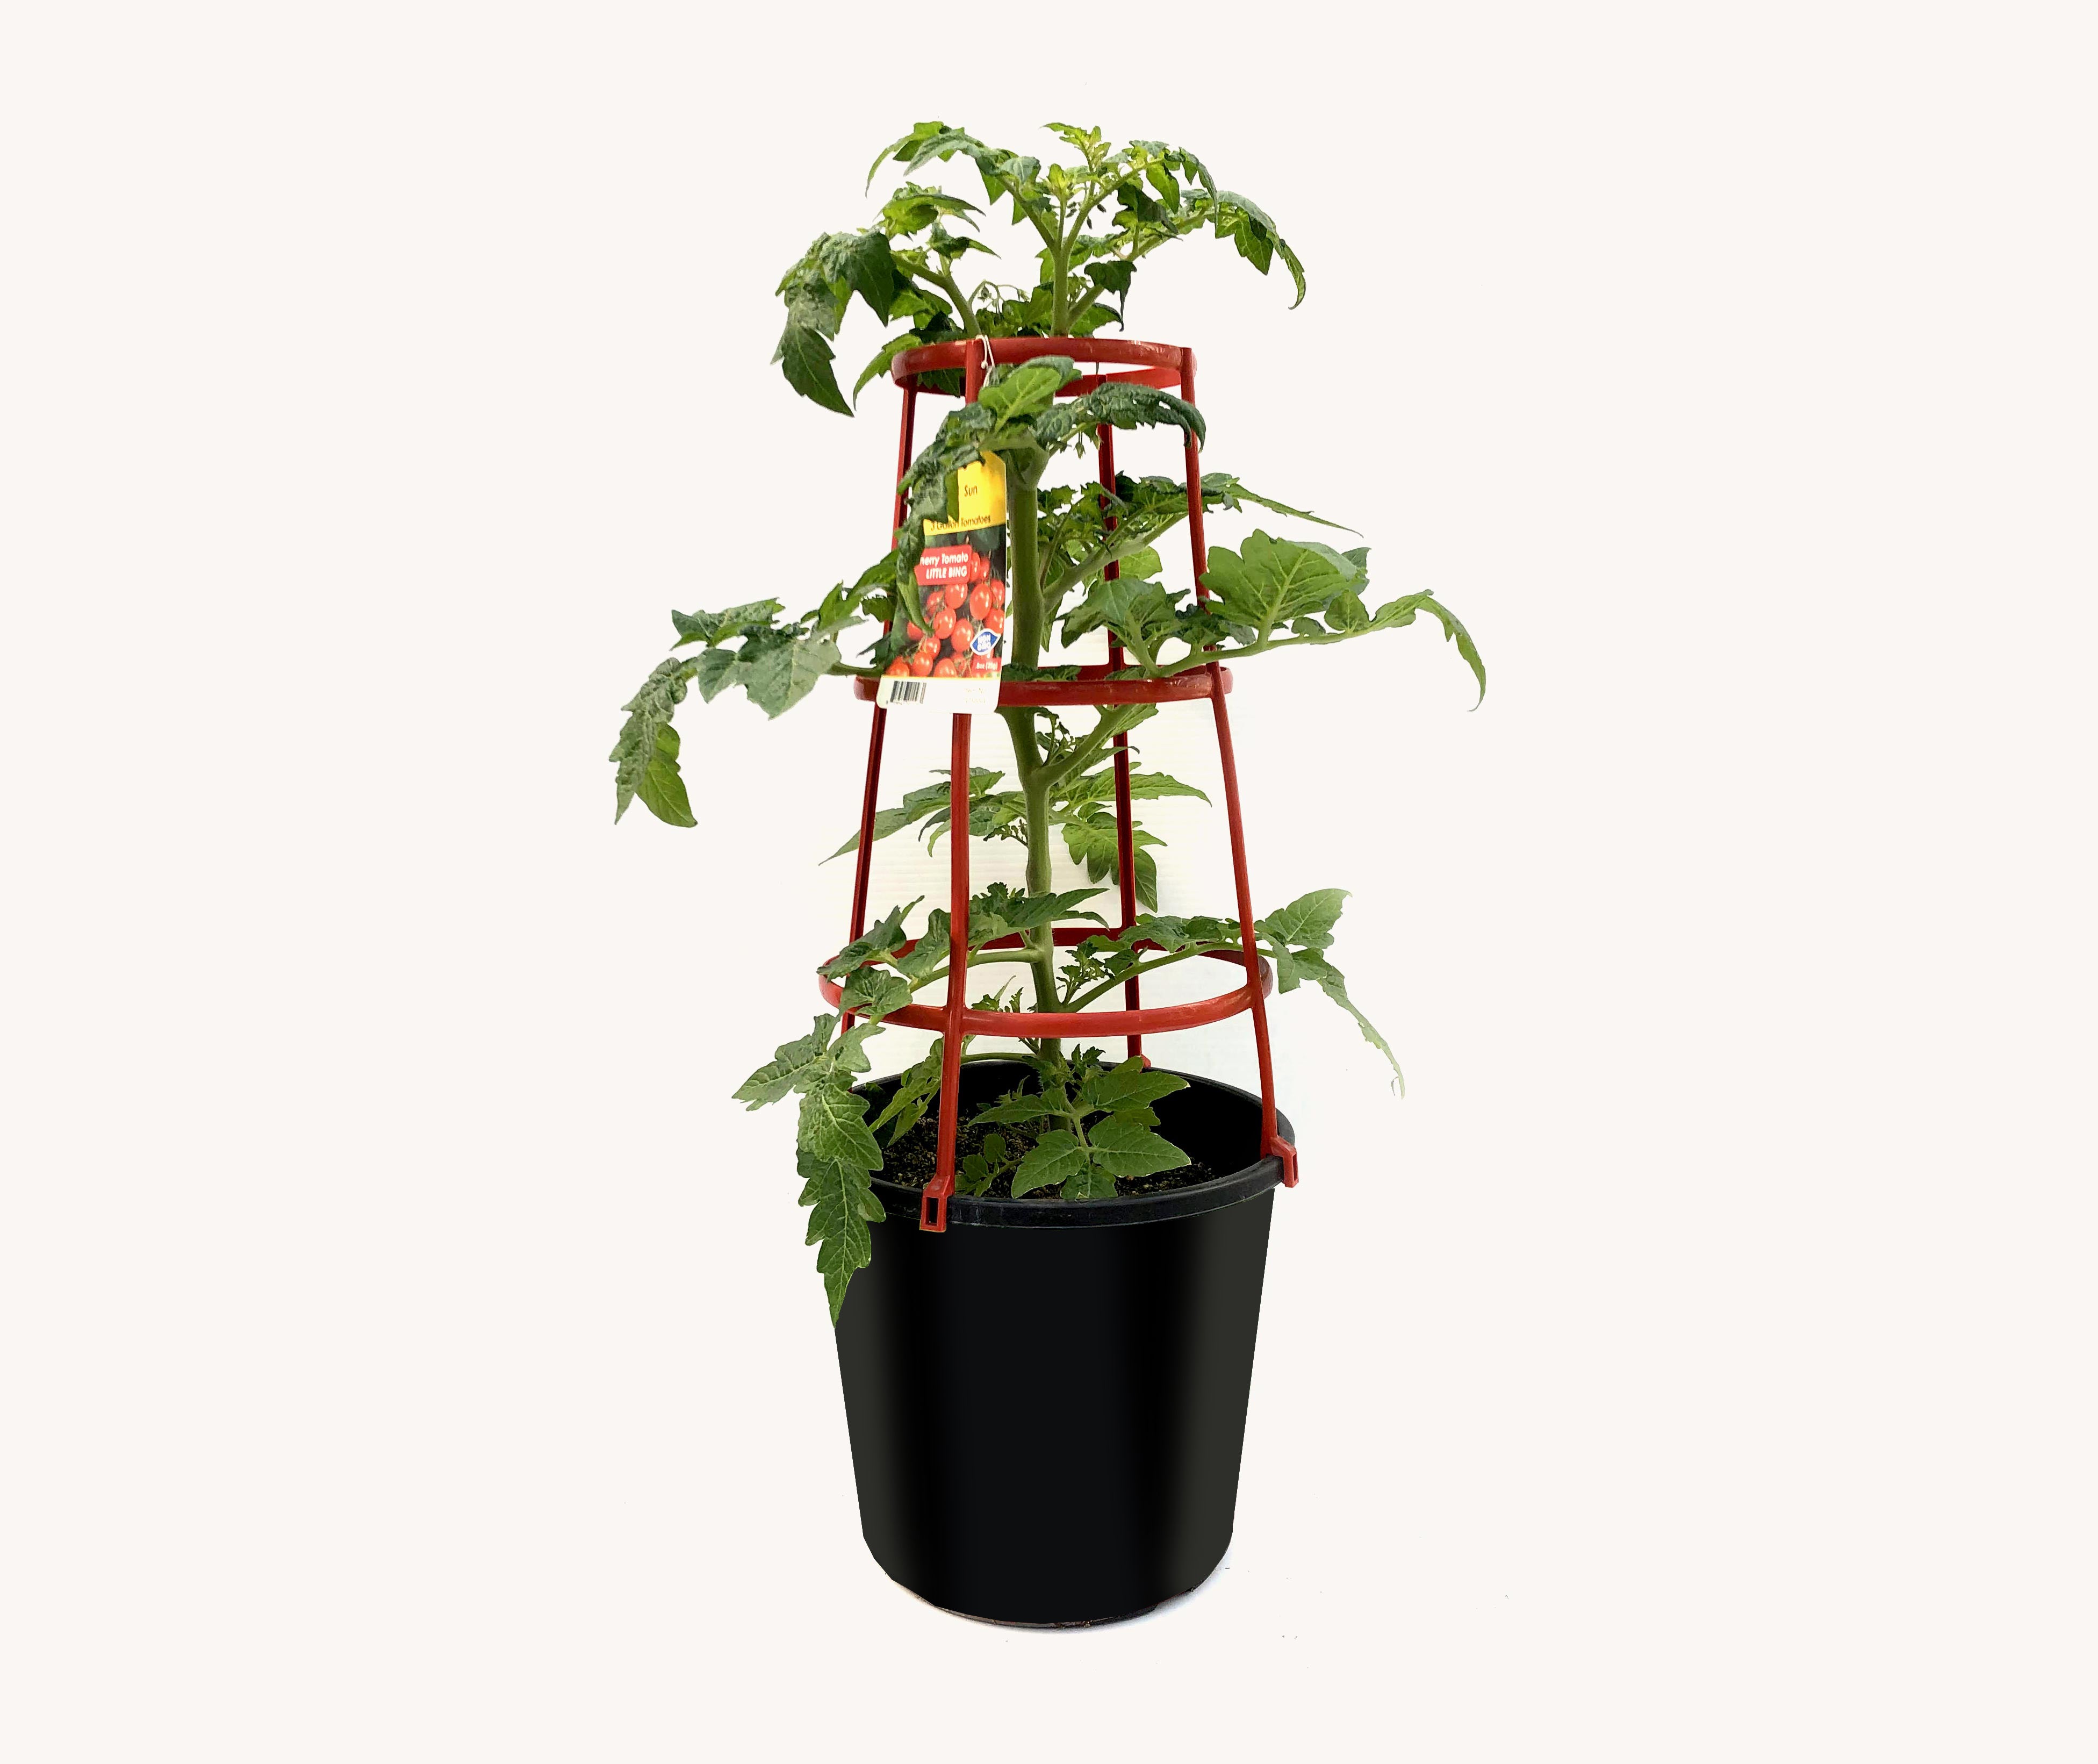 Tomato - Cherry (12" Pot with Cage)